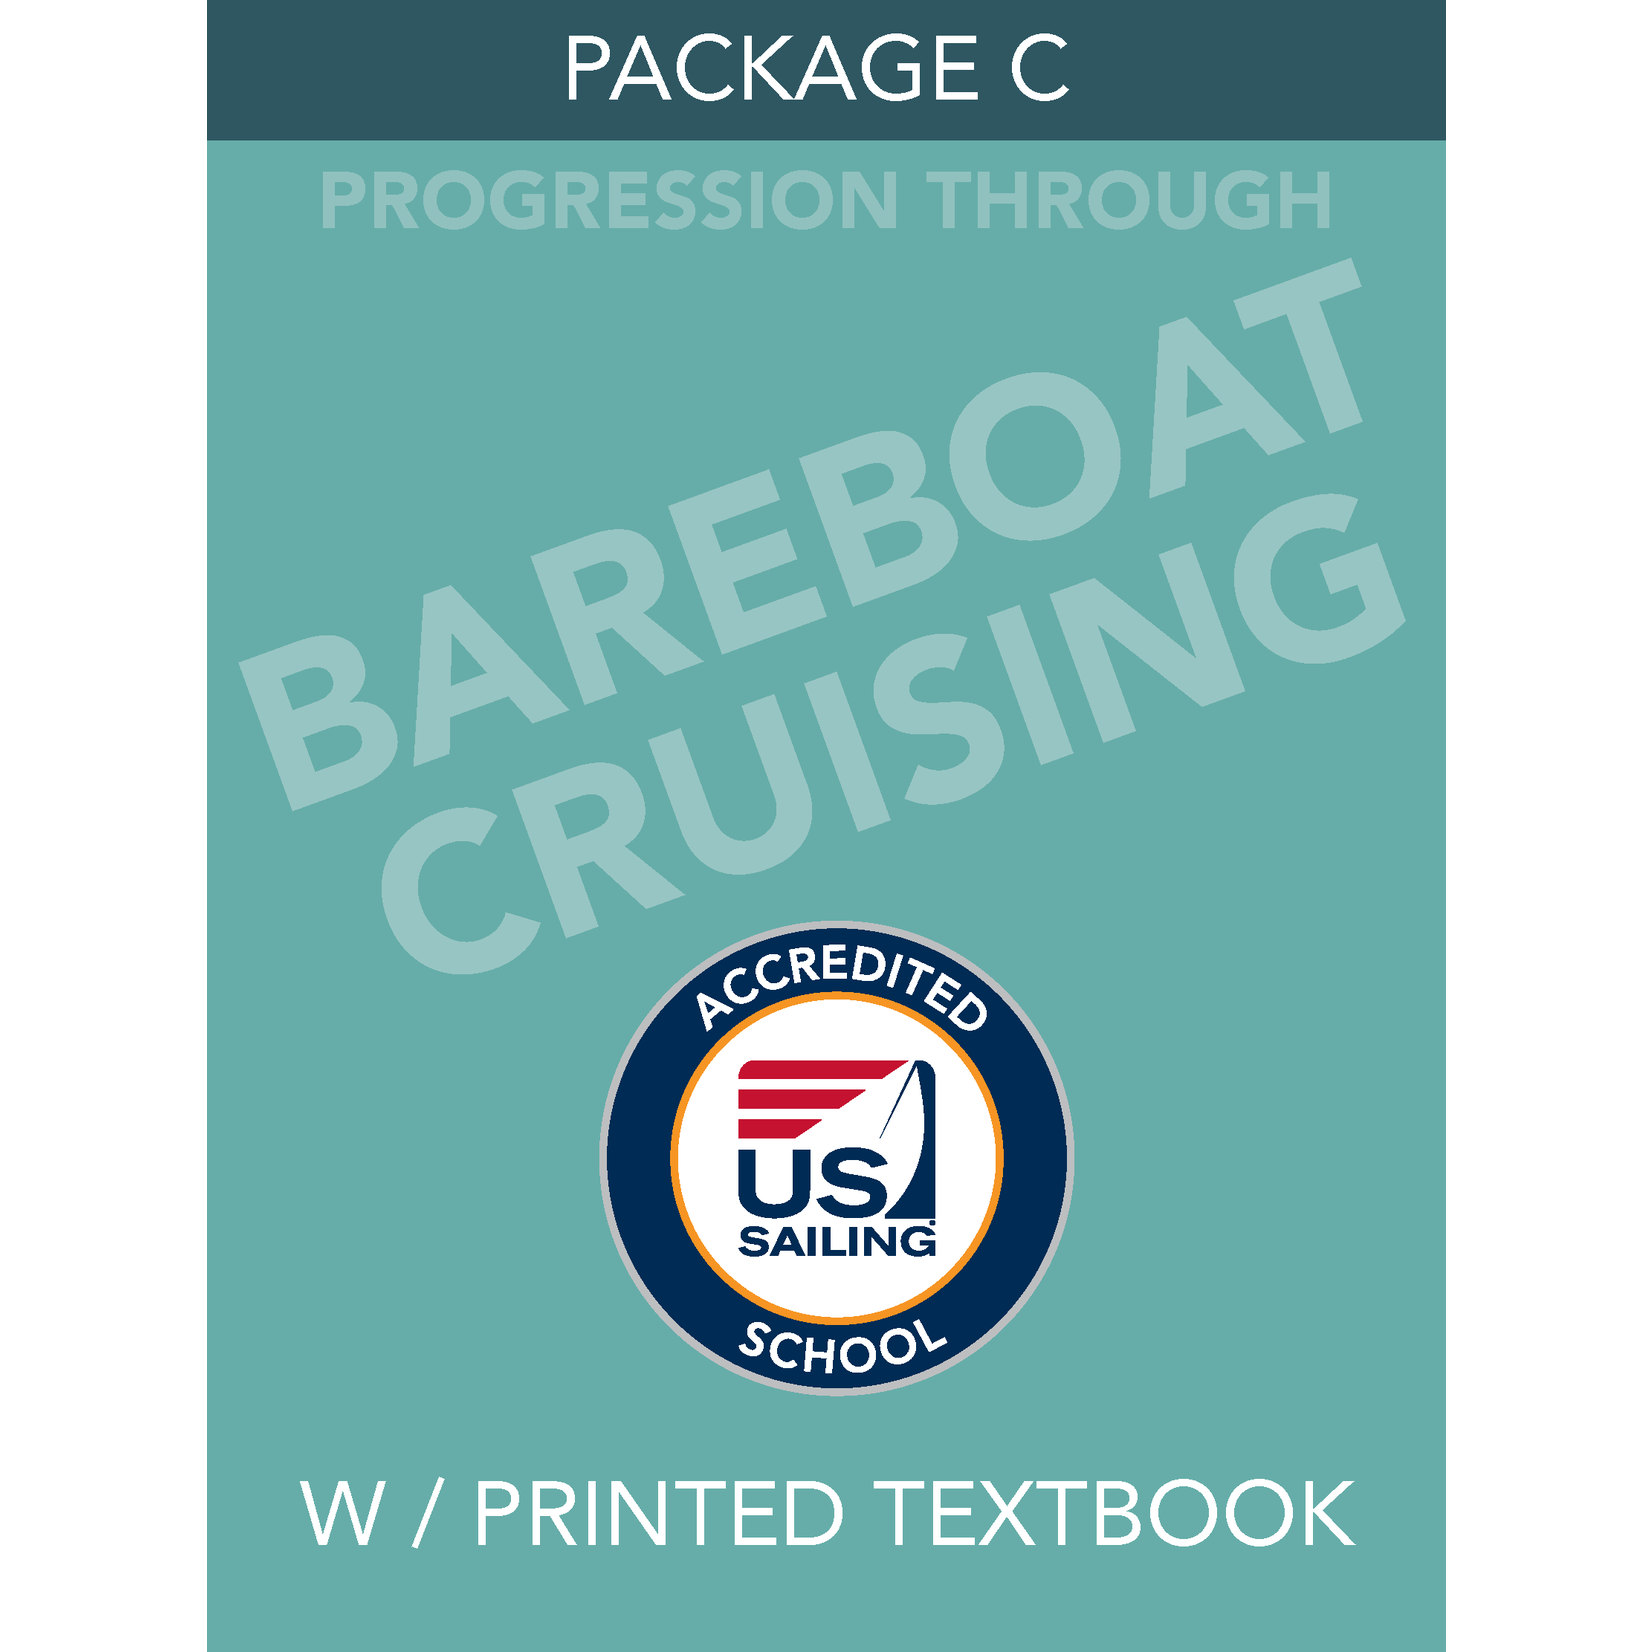 PACKAGE Package C- Bareboat Cruising